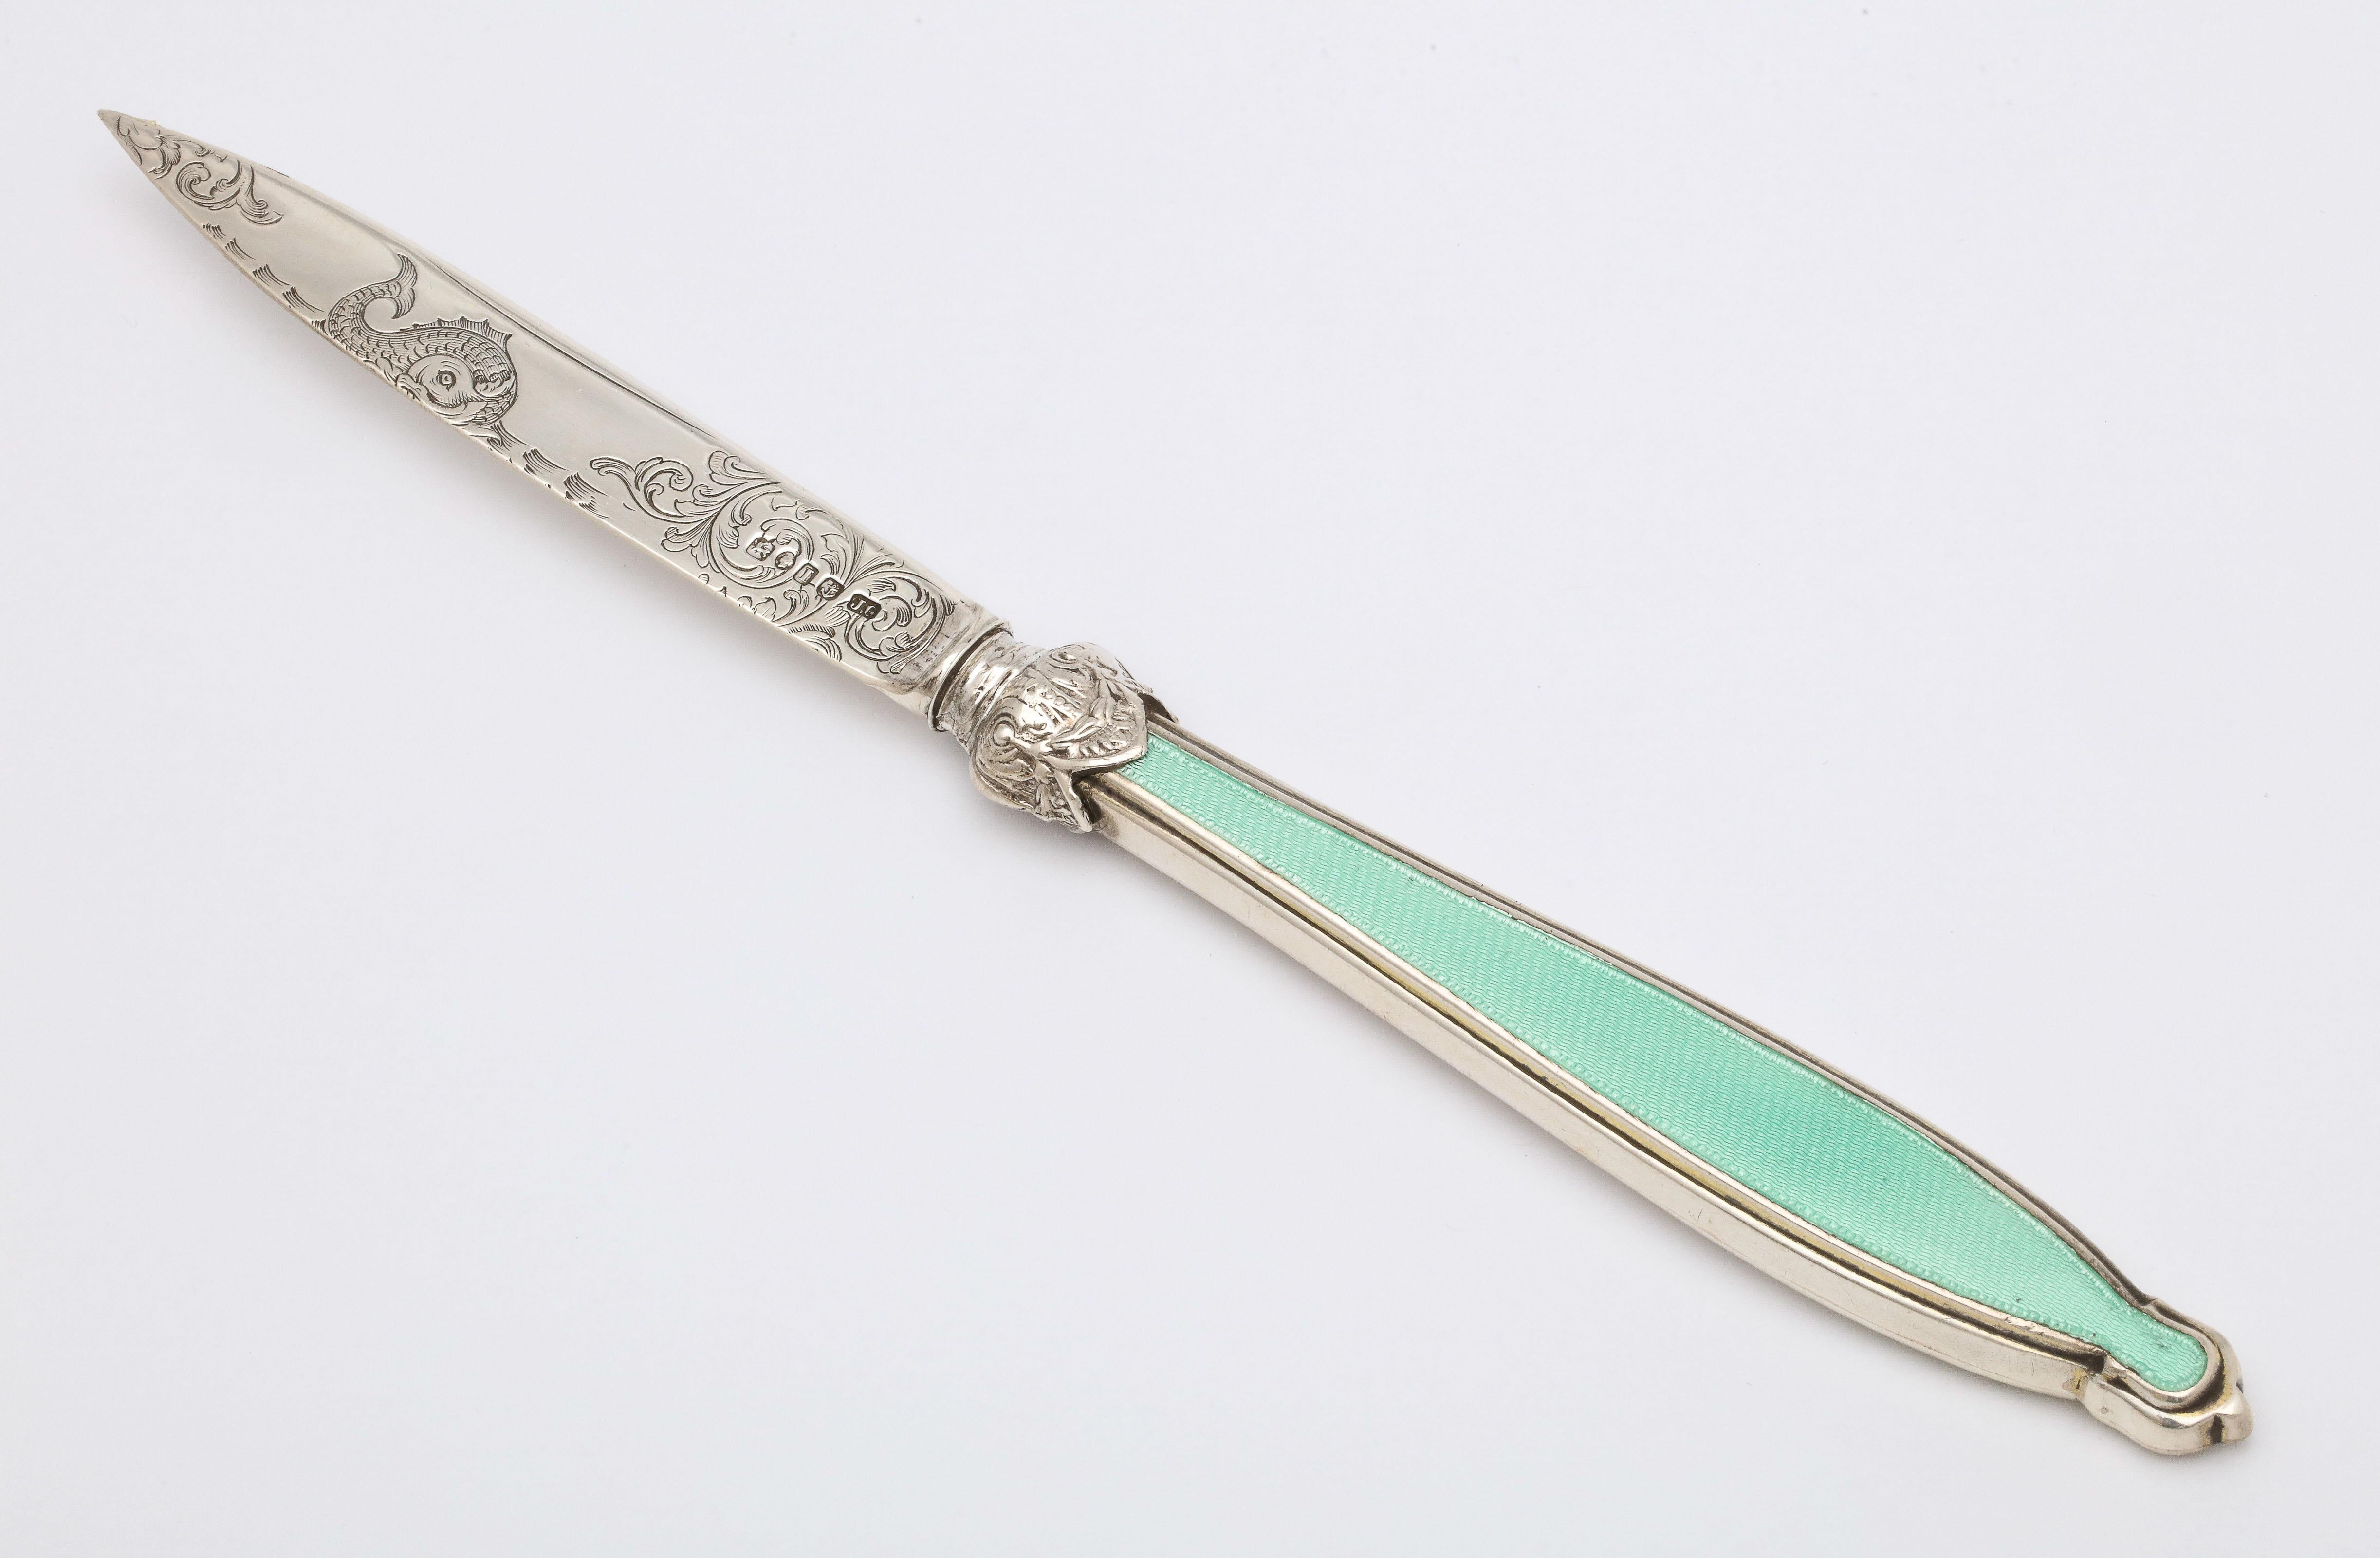 Victorian, sterling silver and mint green guilloche enamel letter opener/paper knife, Birmingham, England, 1857, Joseph Gloster - maker. Sterling silver blade is etched with swirls and a sea serpent. Measures 10 1/8 inches long x 1 inch wide (at